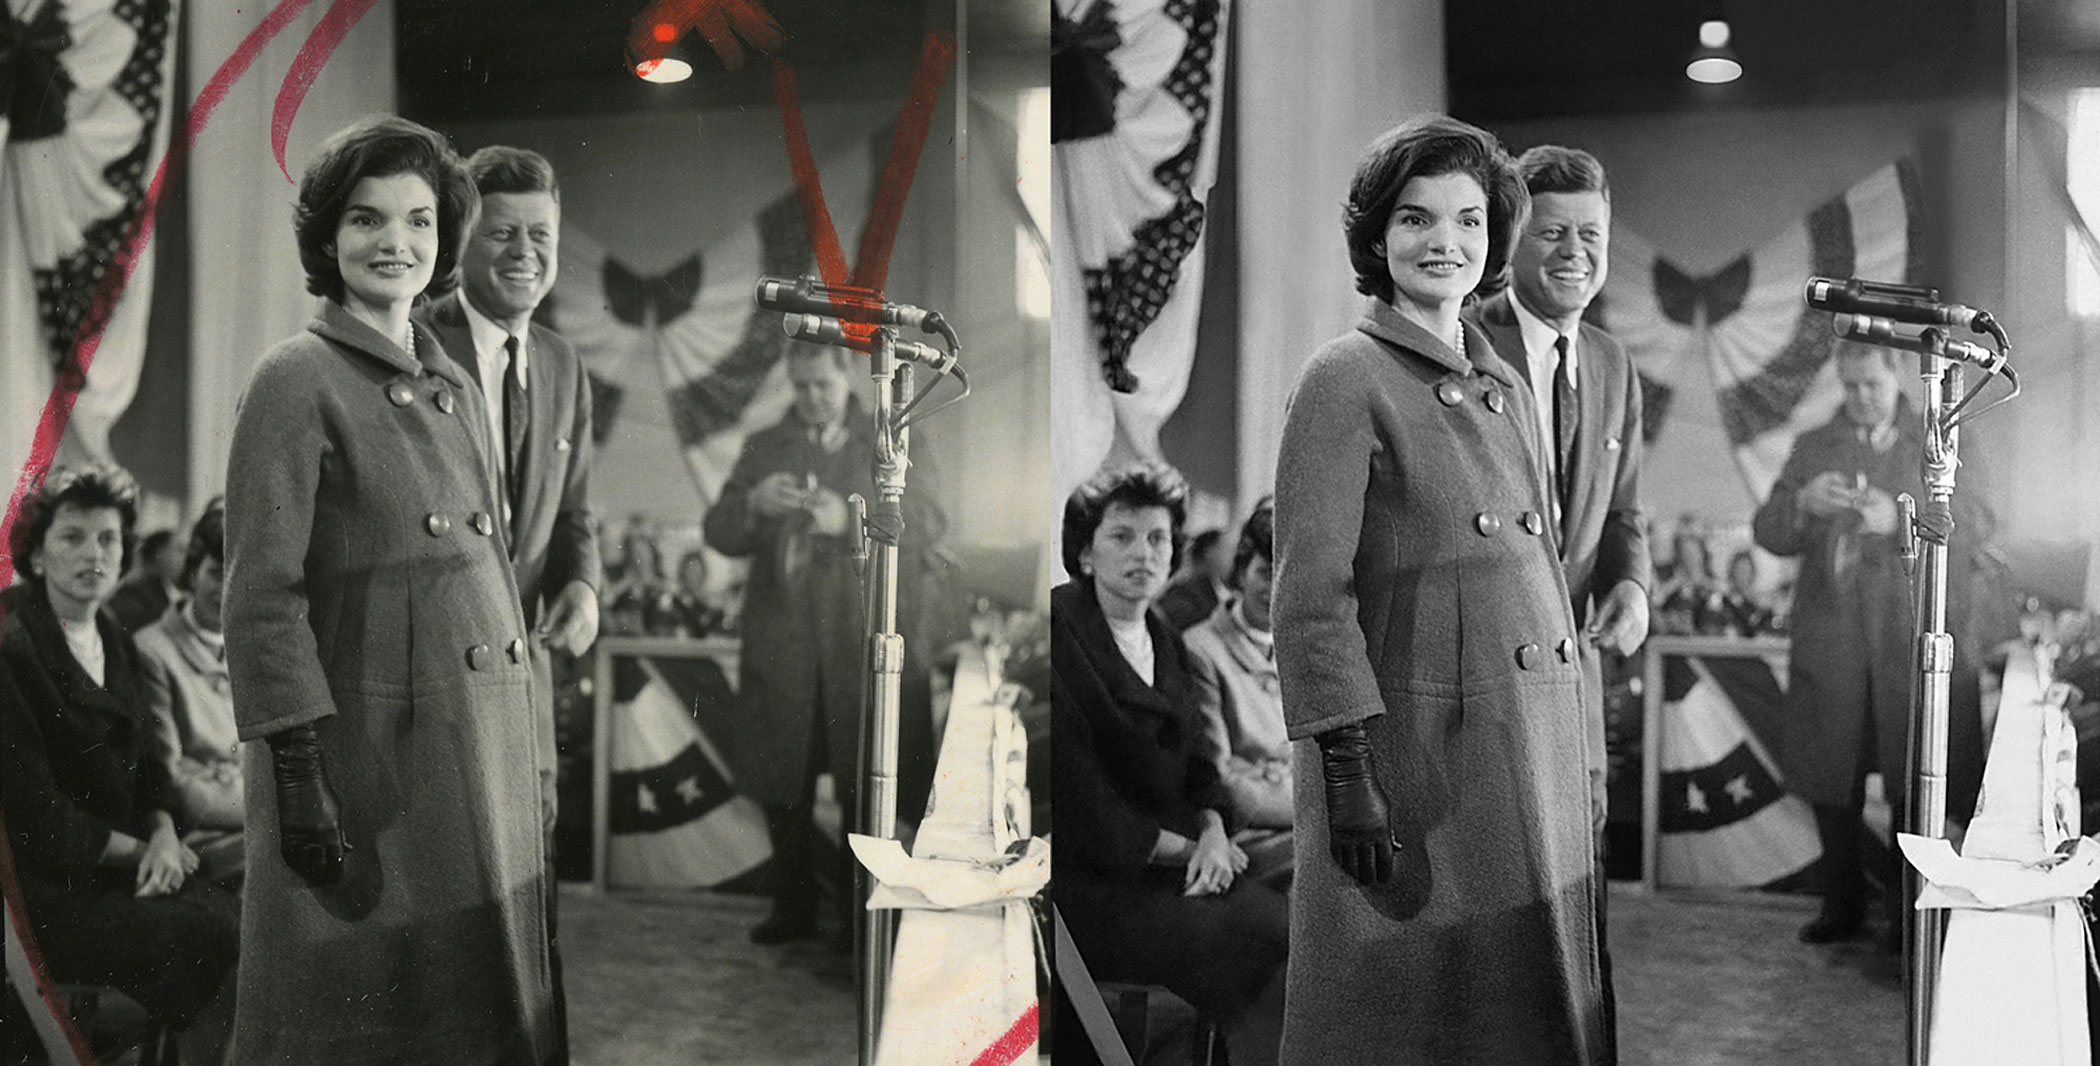 President-elect John F. Kennedy, alongside his expectant wife, Jacqueline, gave his acceptance speech at the National Guard Armory in Hyannis Port, Mass., the day after 1960 election. The Newseum restoration, right, removed the red marks made by the photographer and adjusted the tone of the photo.